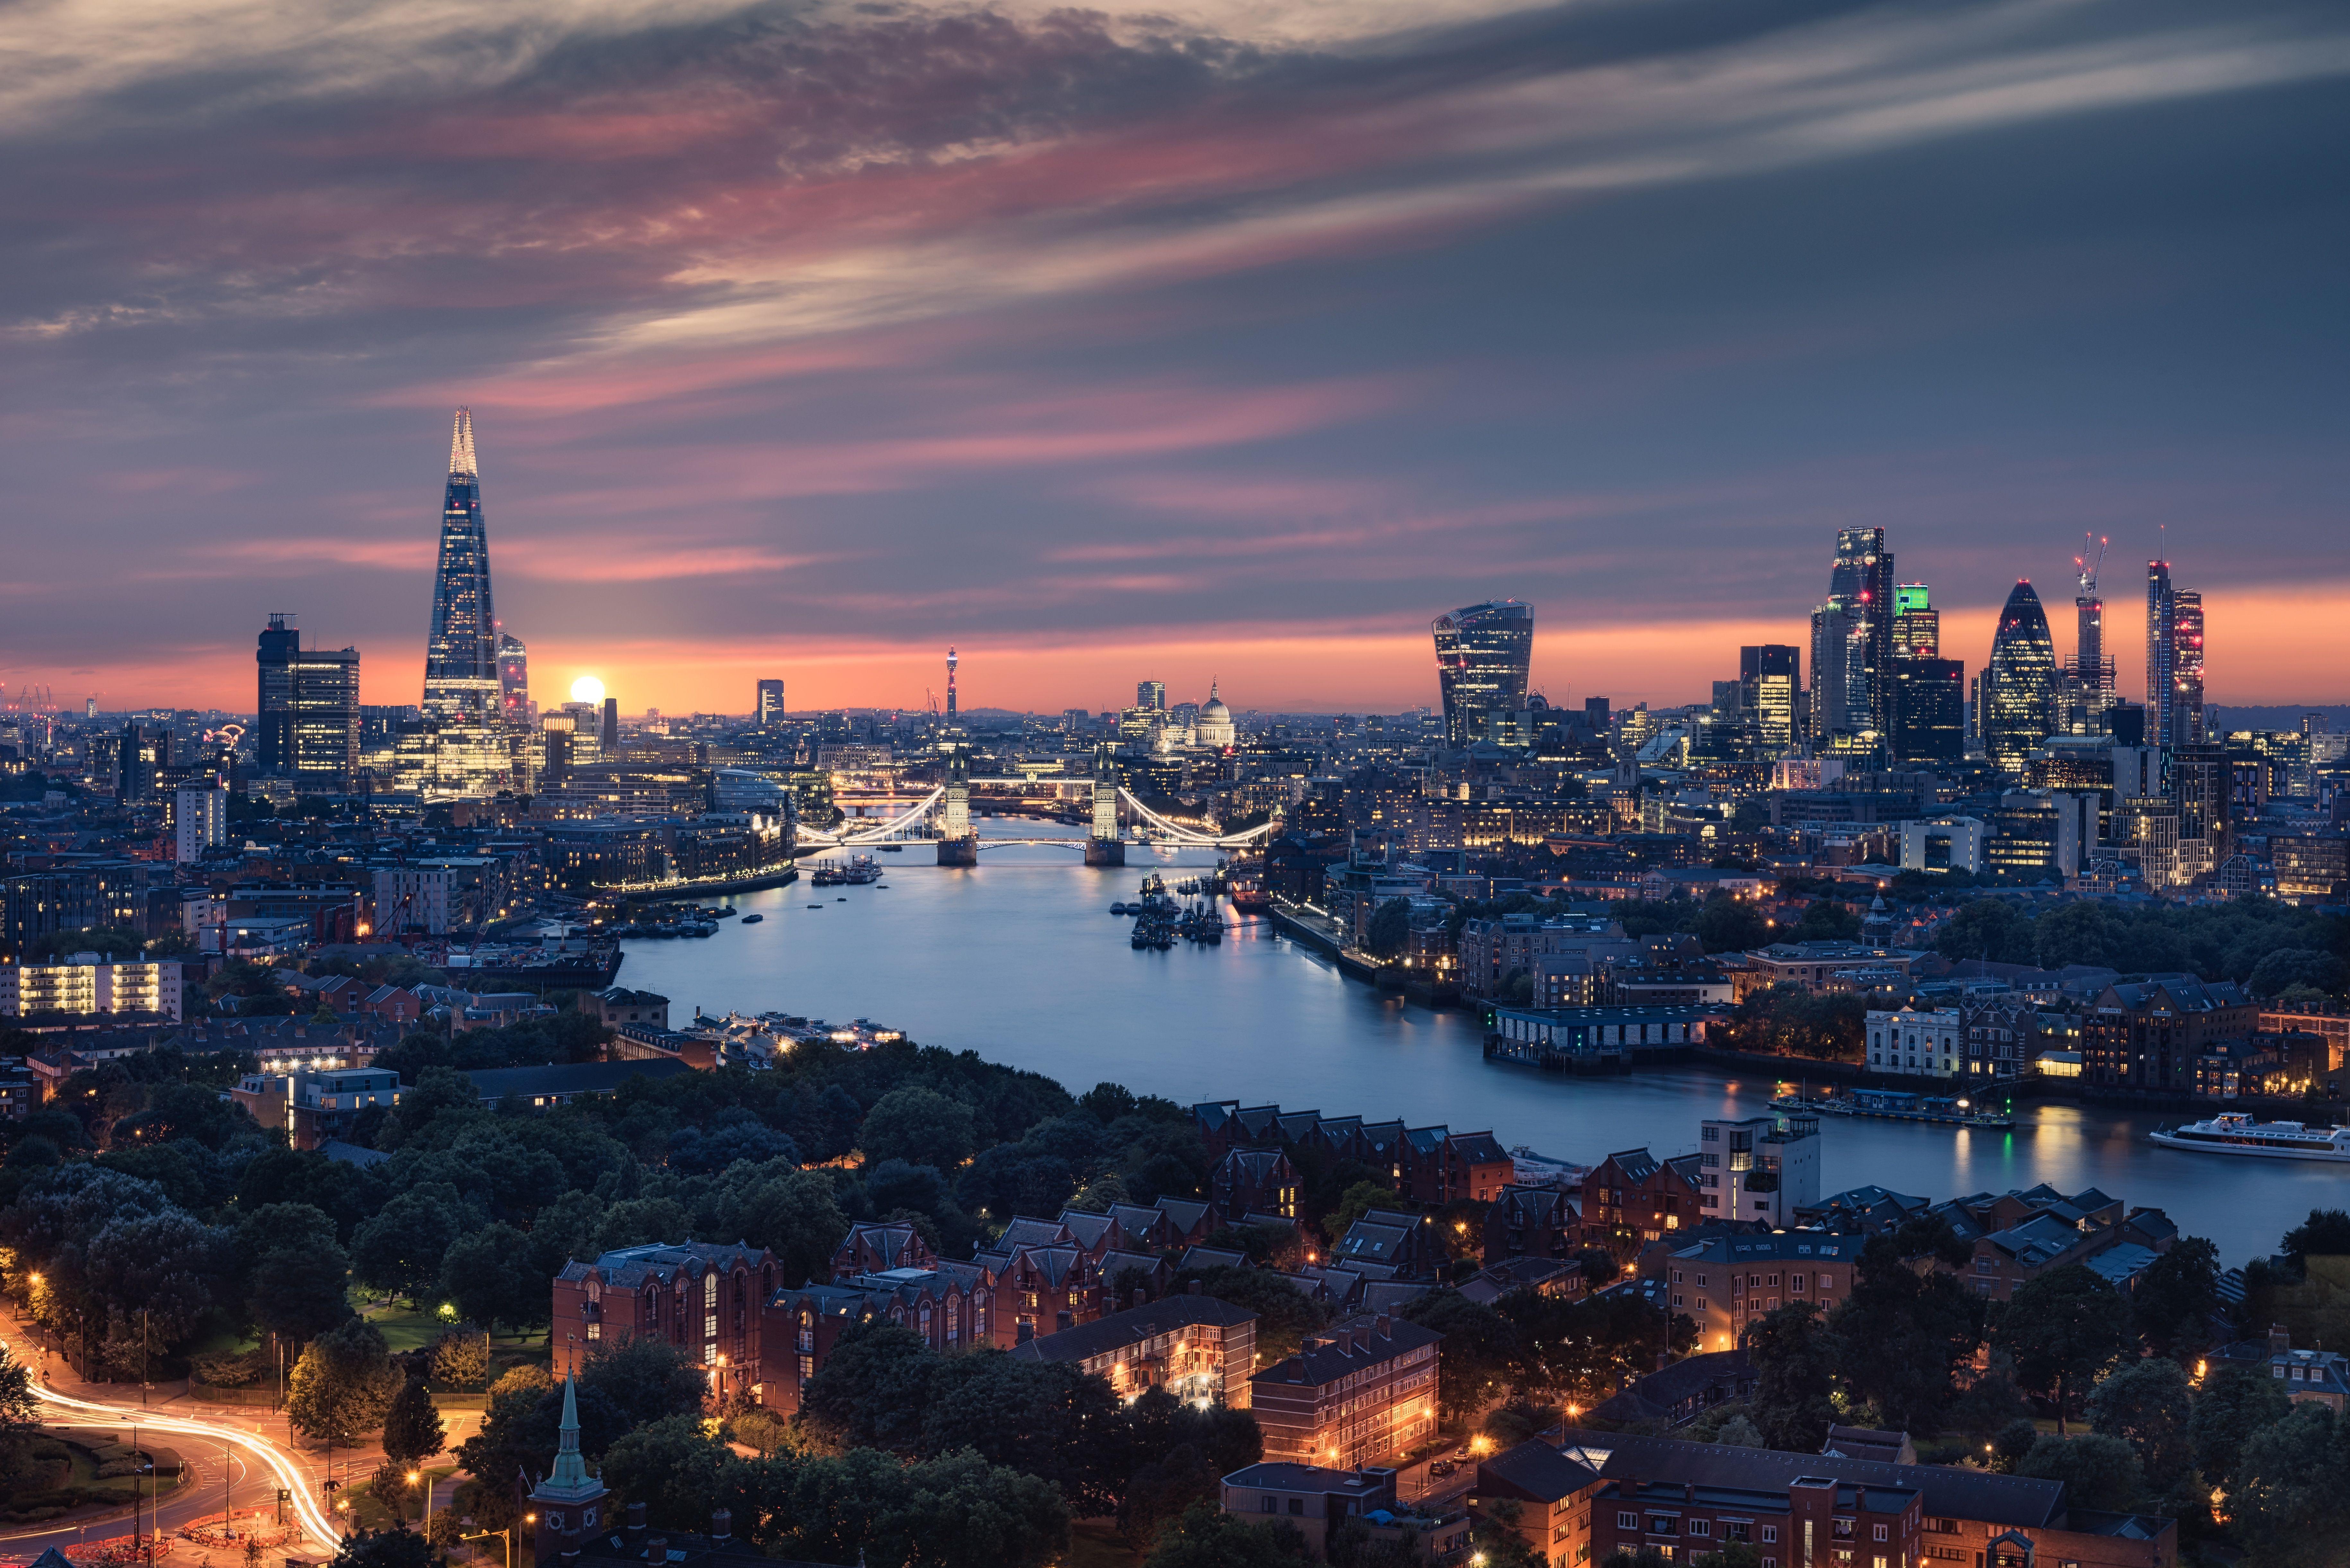 London Skyline At Night Wallpapers Top Free London Skyline At Night Backgrounds Wallpaperaccess